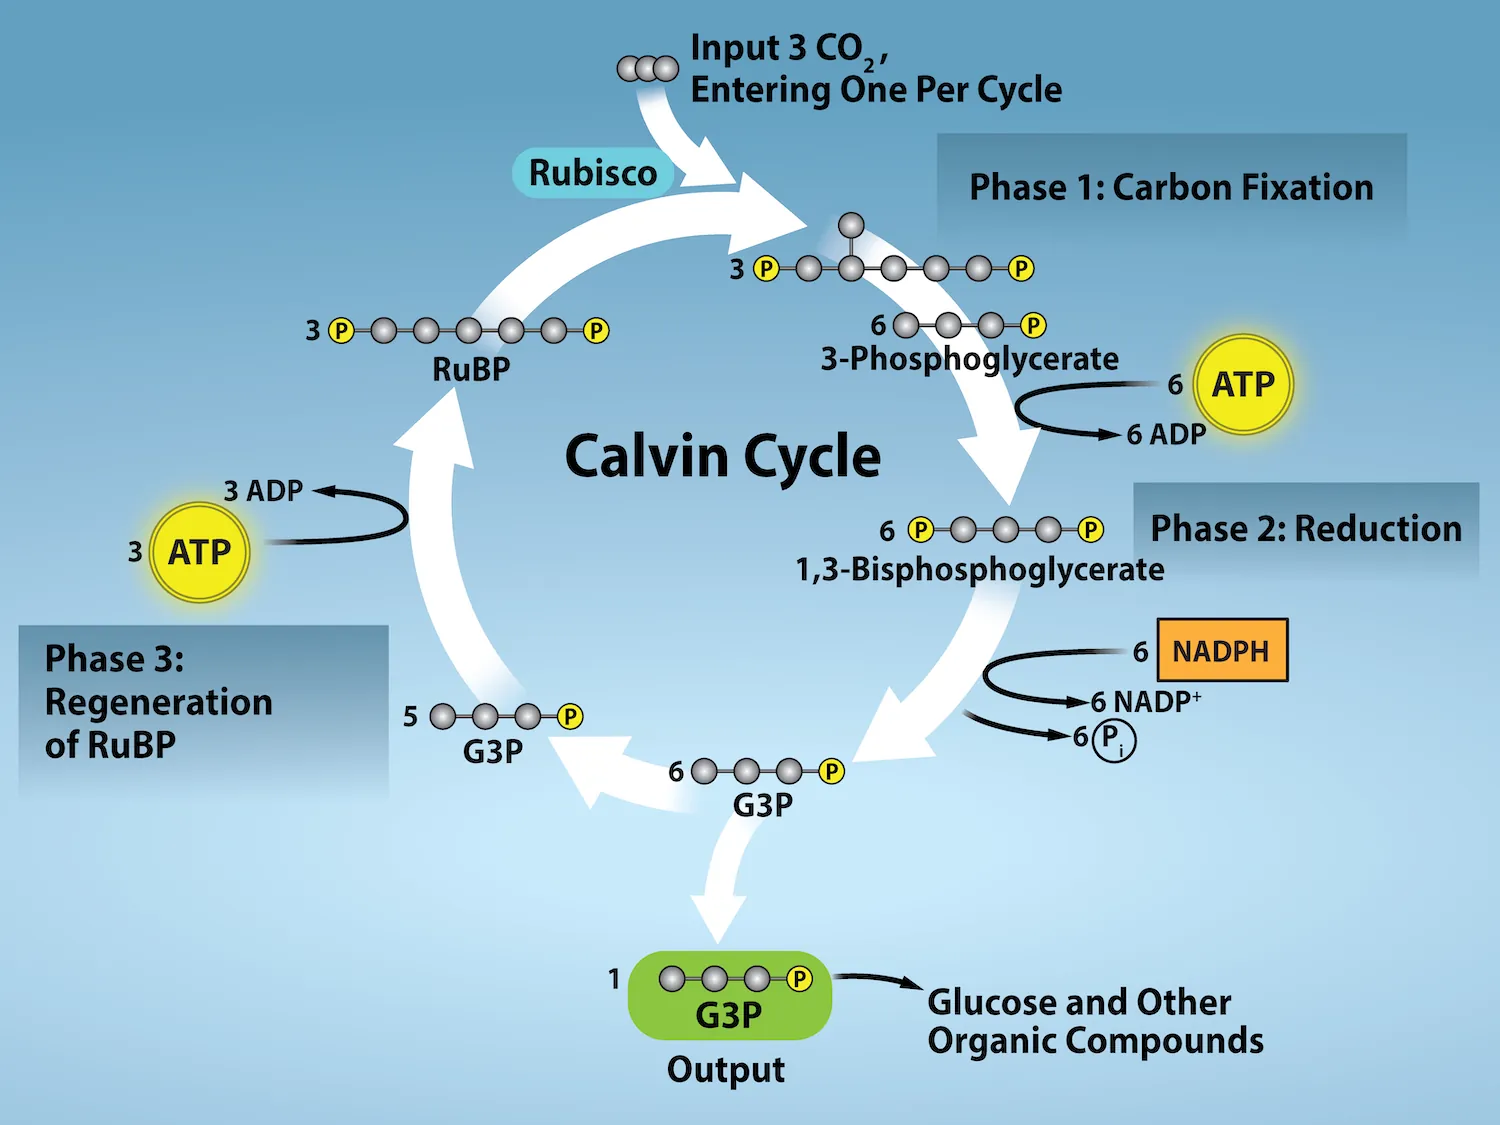 A diagram of the Calvin cycle is shown with its three stages: carbon fixation, 3 dash P G A reduction, and regeneration of upper case R lower case u upper case B upper case P. In stage 1, the enzyme upper R lower u upper B lower i lower s upper C upper O adds a carbon dioxide to the five-carbon molecule upper R lower u upper B upper P, producing two three-carbon 3 dash PGA molecules. In stage 2, two N A D P H and two A T P are used to reduce 3 dash PGA to G A 3 P. In stage 3 upper R lower u upper B upper P is regenerated from G A 3 P. One A T P is used in the process. Three complete cycles produces one new G A 3 P, which is shunted out of the cycle and made into glucose, whose moledular formula is upper C subscript 6 baseline upper H subscript 12 baseline upper O subscript 6 baseline.